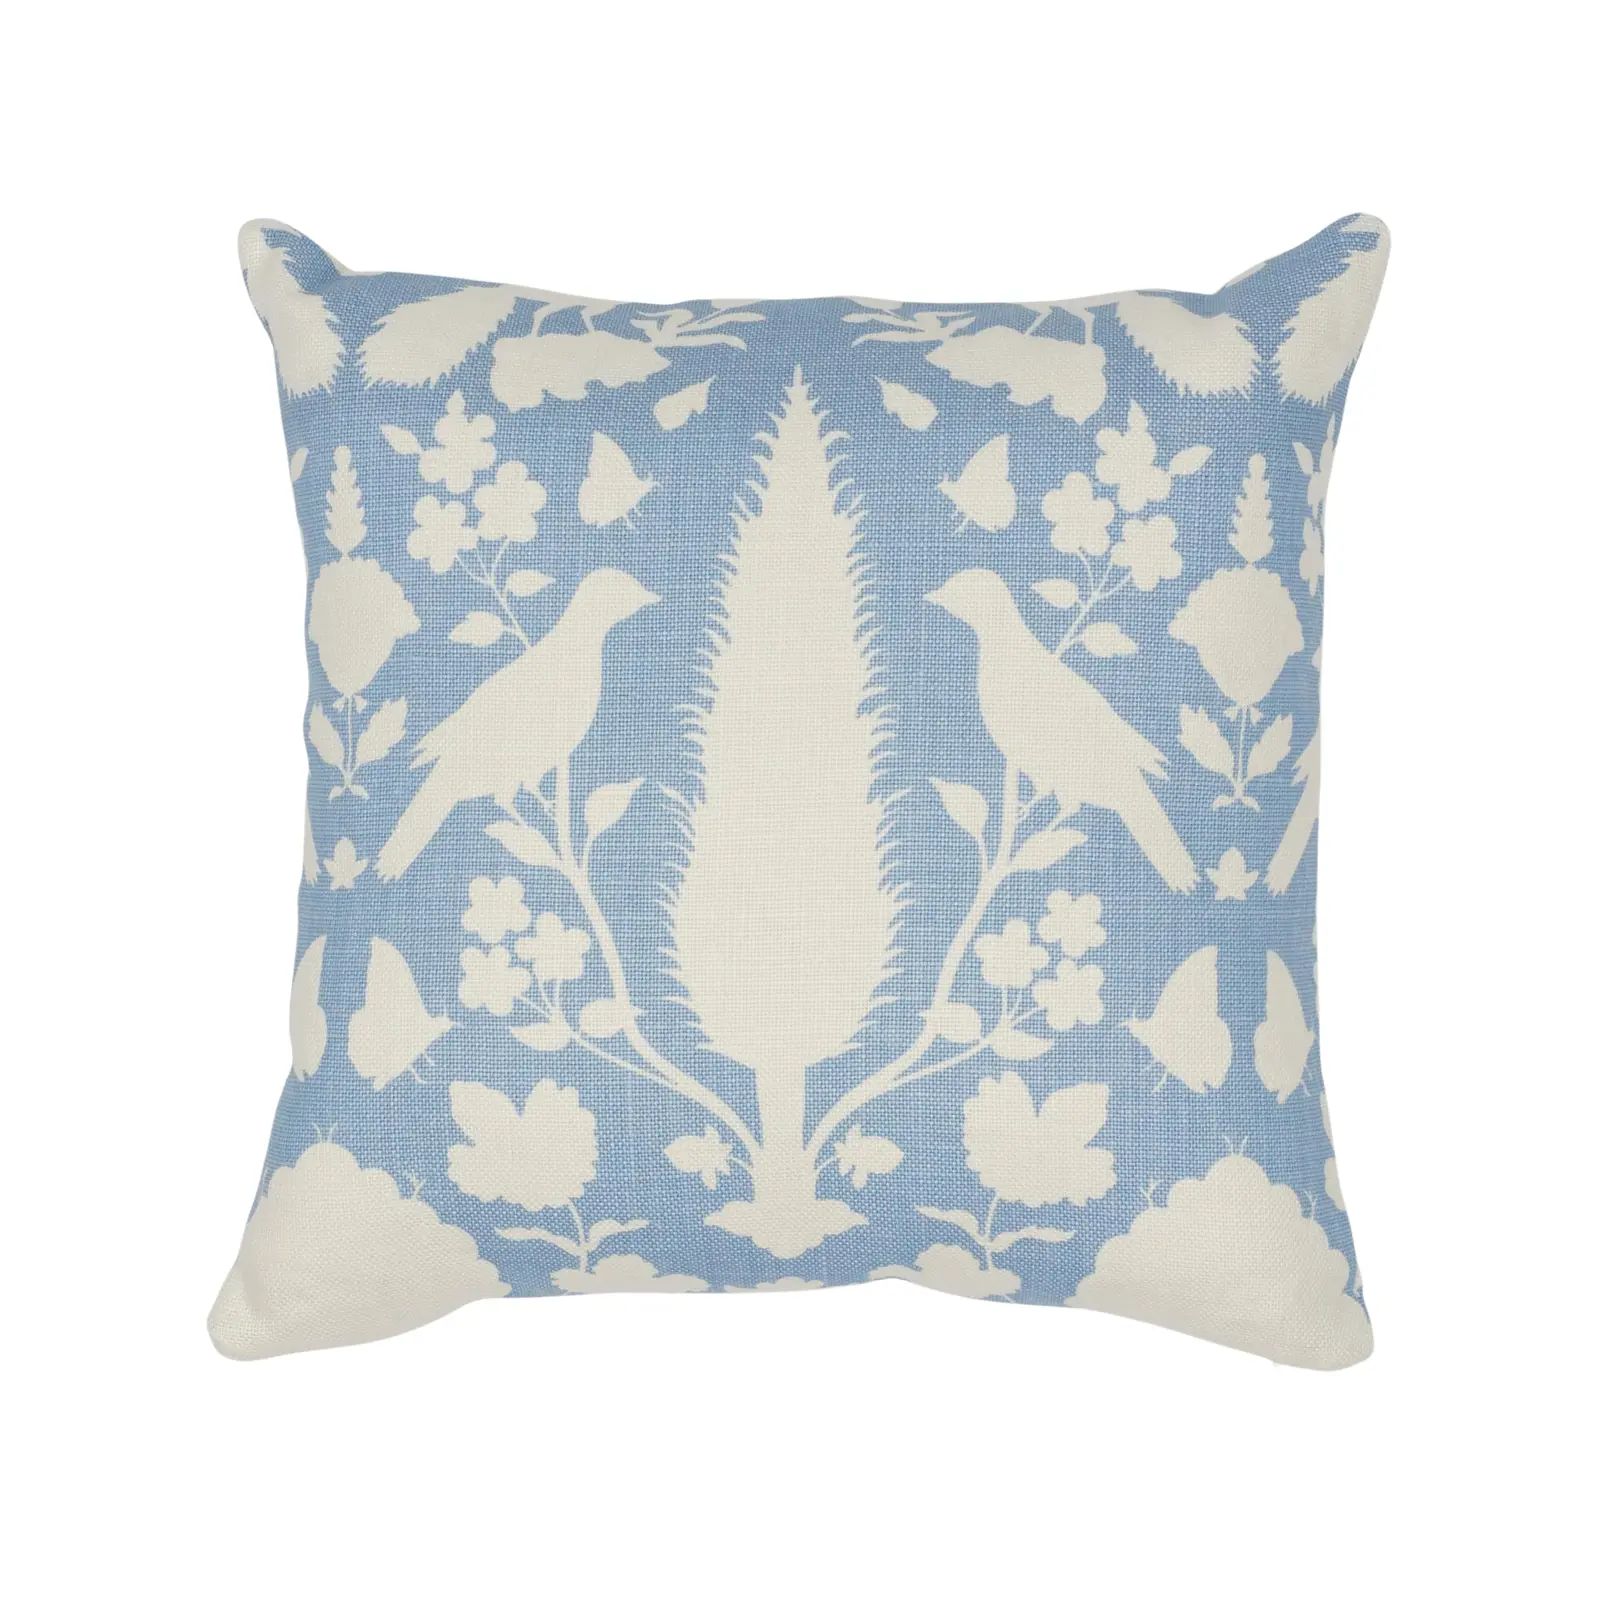 Contemporary Schumacher Chenonceau Pillow in Sky | Chairish